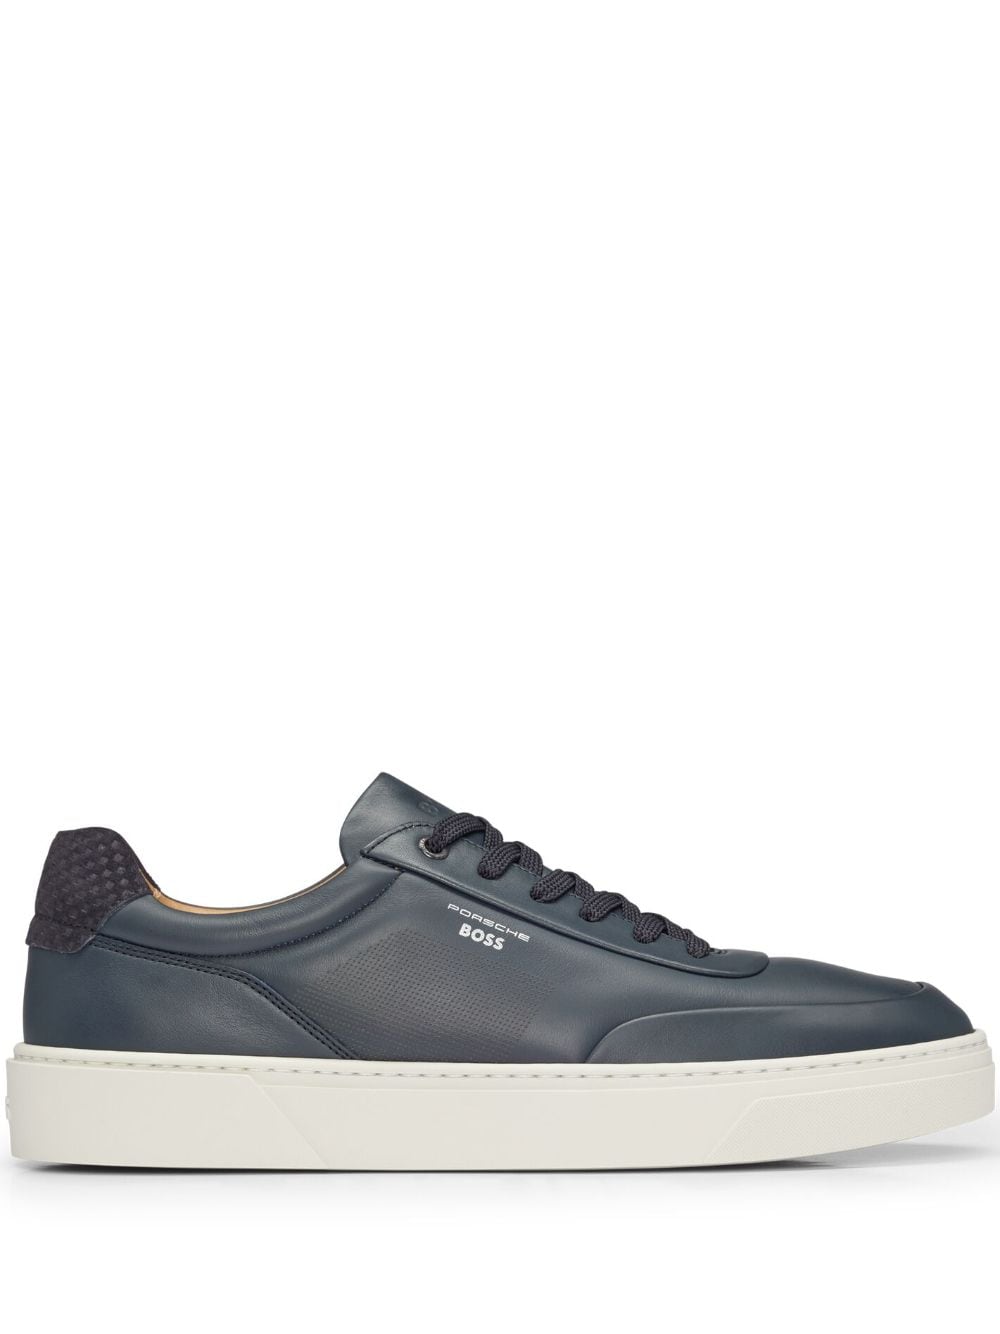 HUGO BOSS X PORSCHE PERFORATED LEATHER SNEAKERS